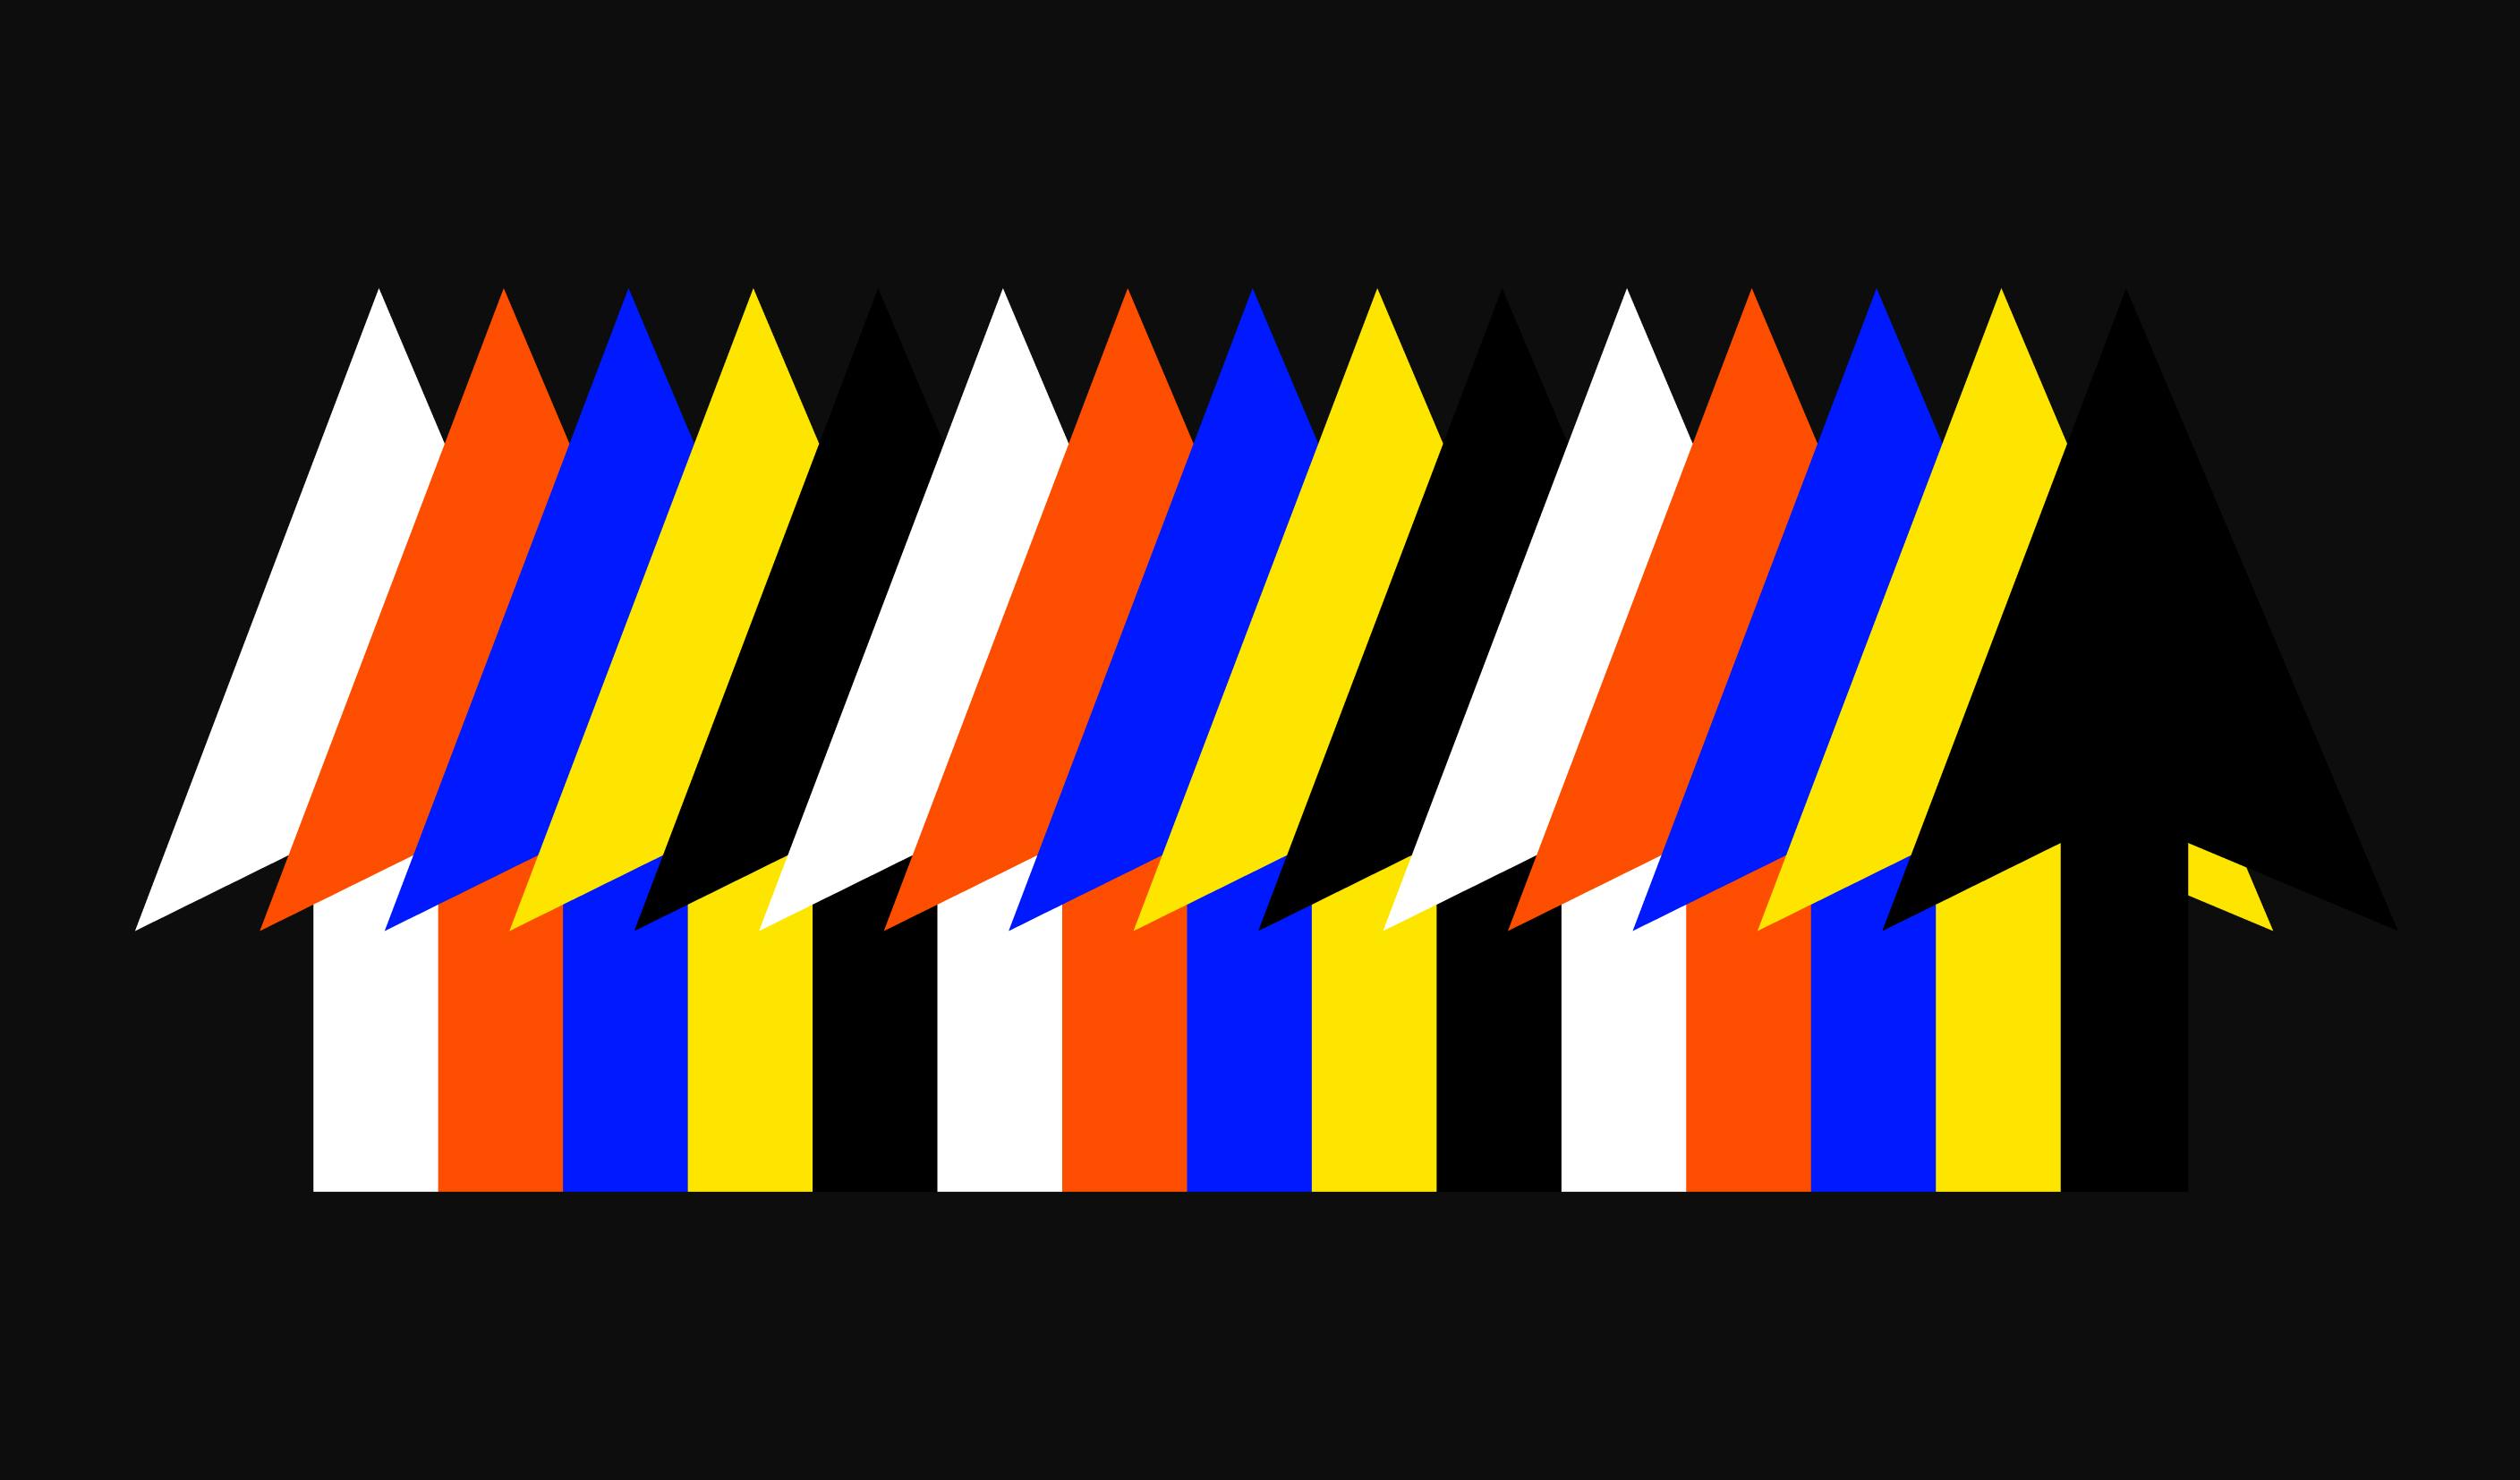 cursors of different colors aligned partially overlapping